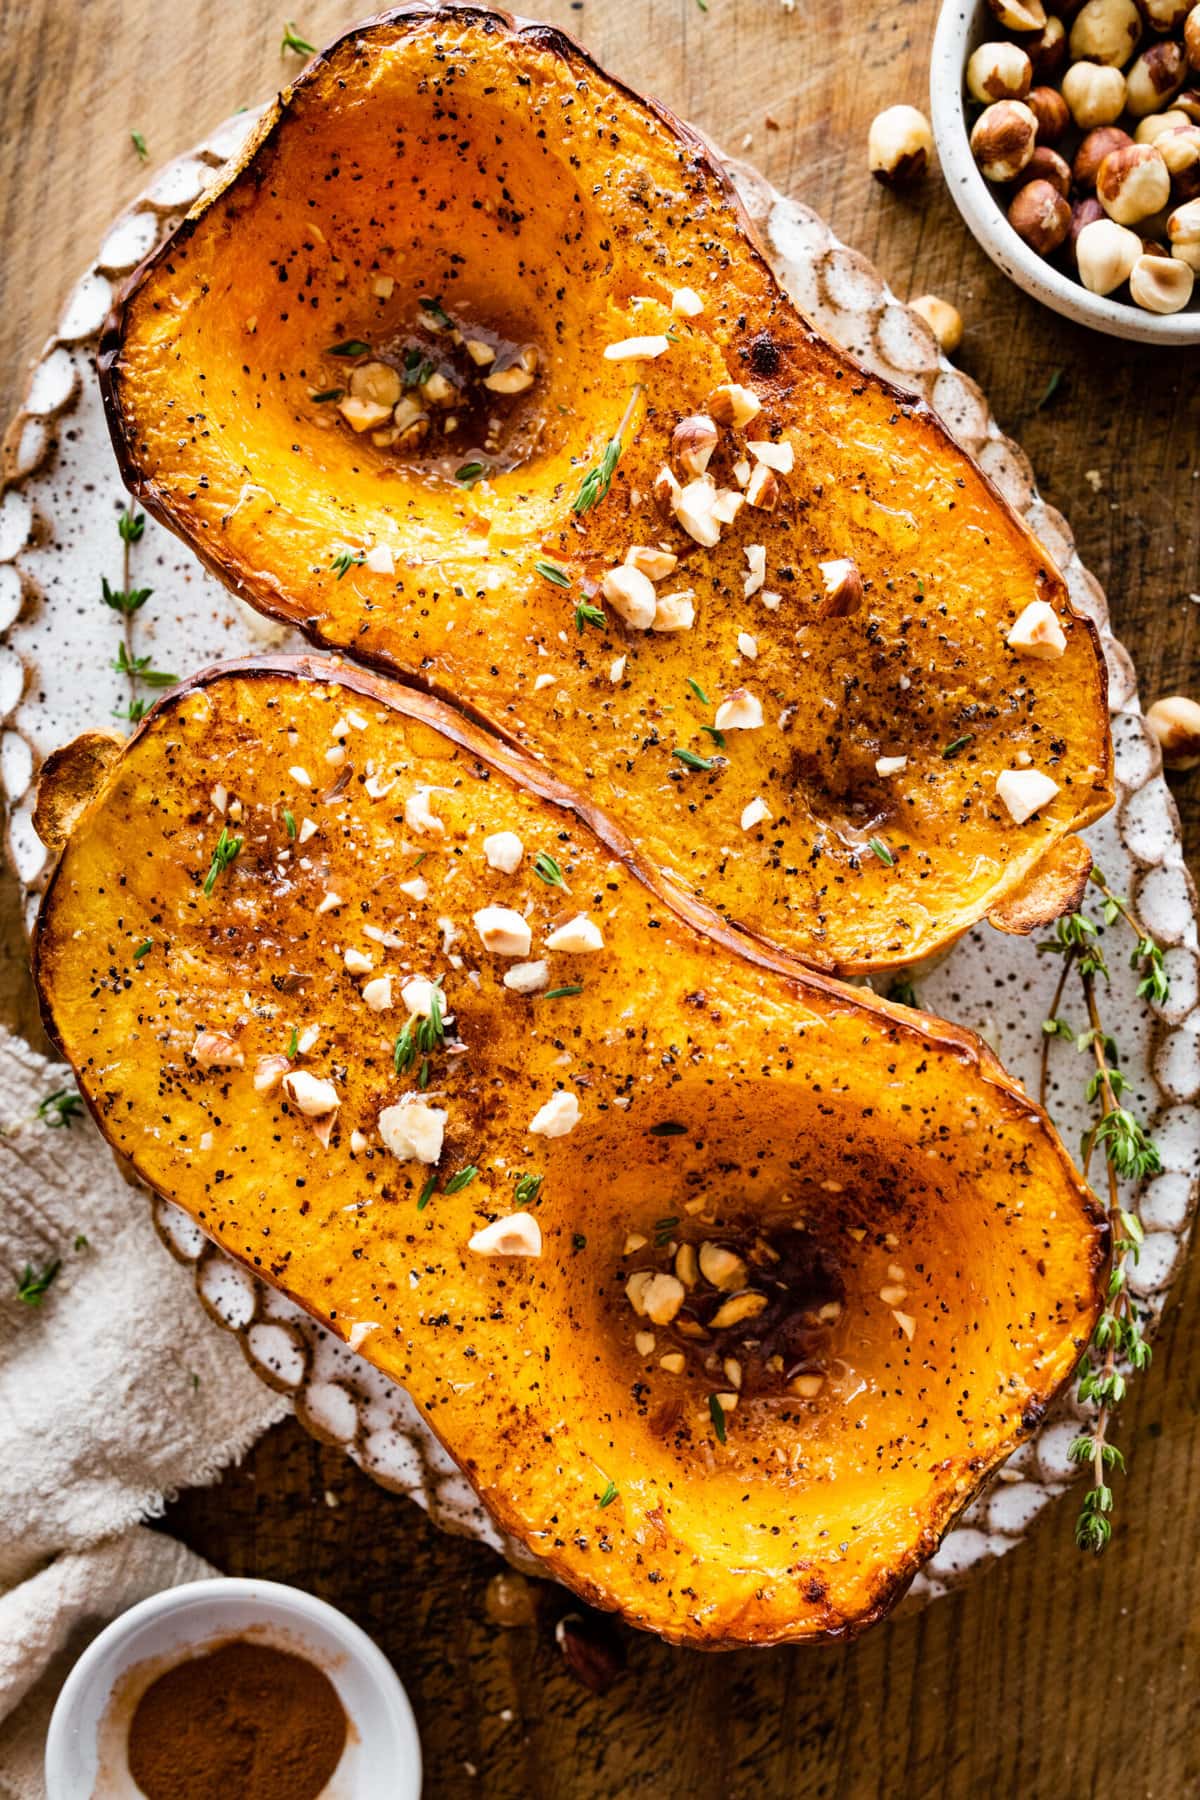 Baked butternut squash on a platter with nuts and herbs as seasoning.